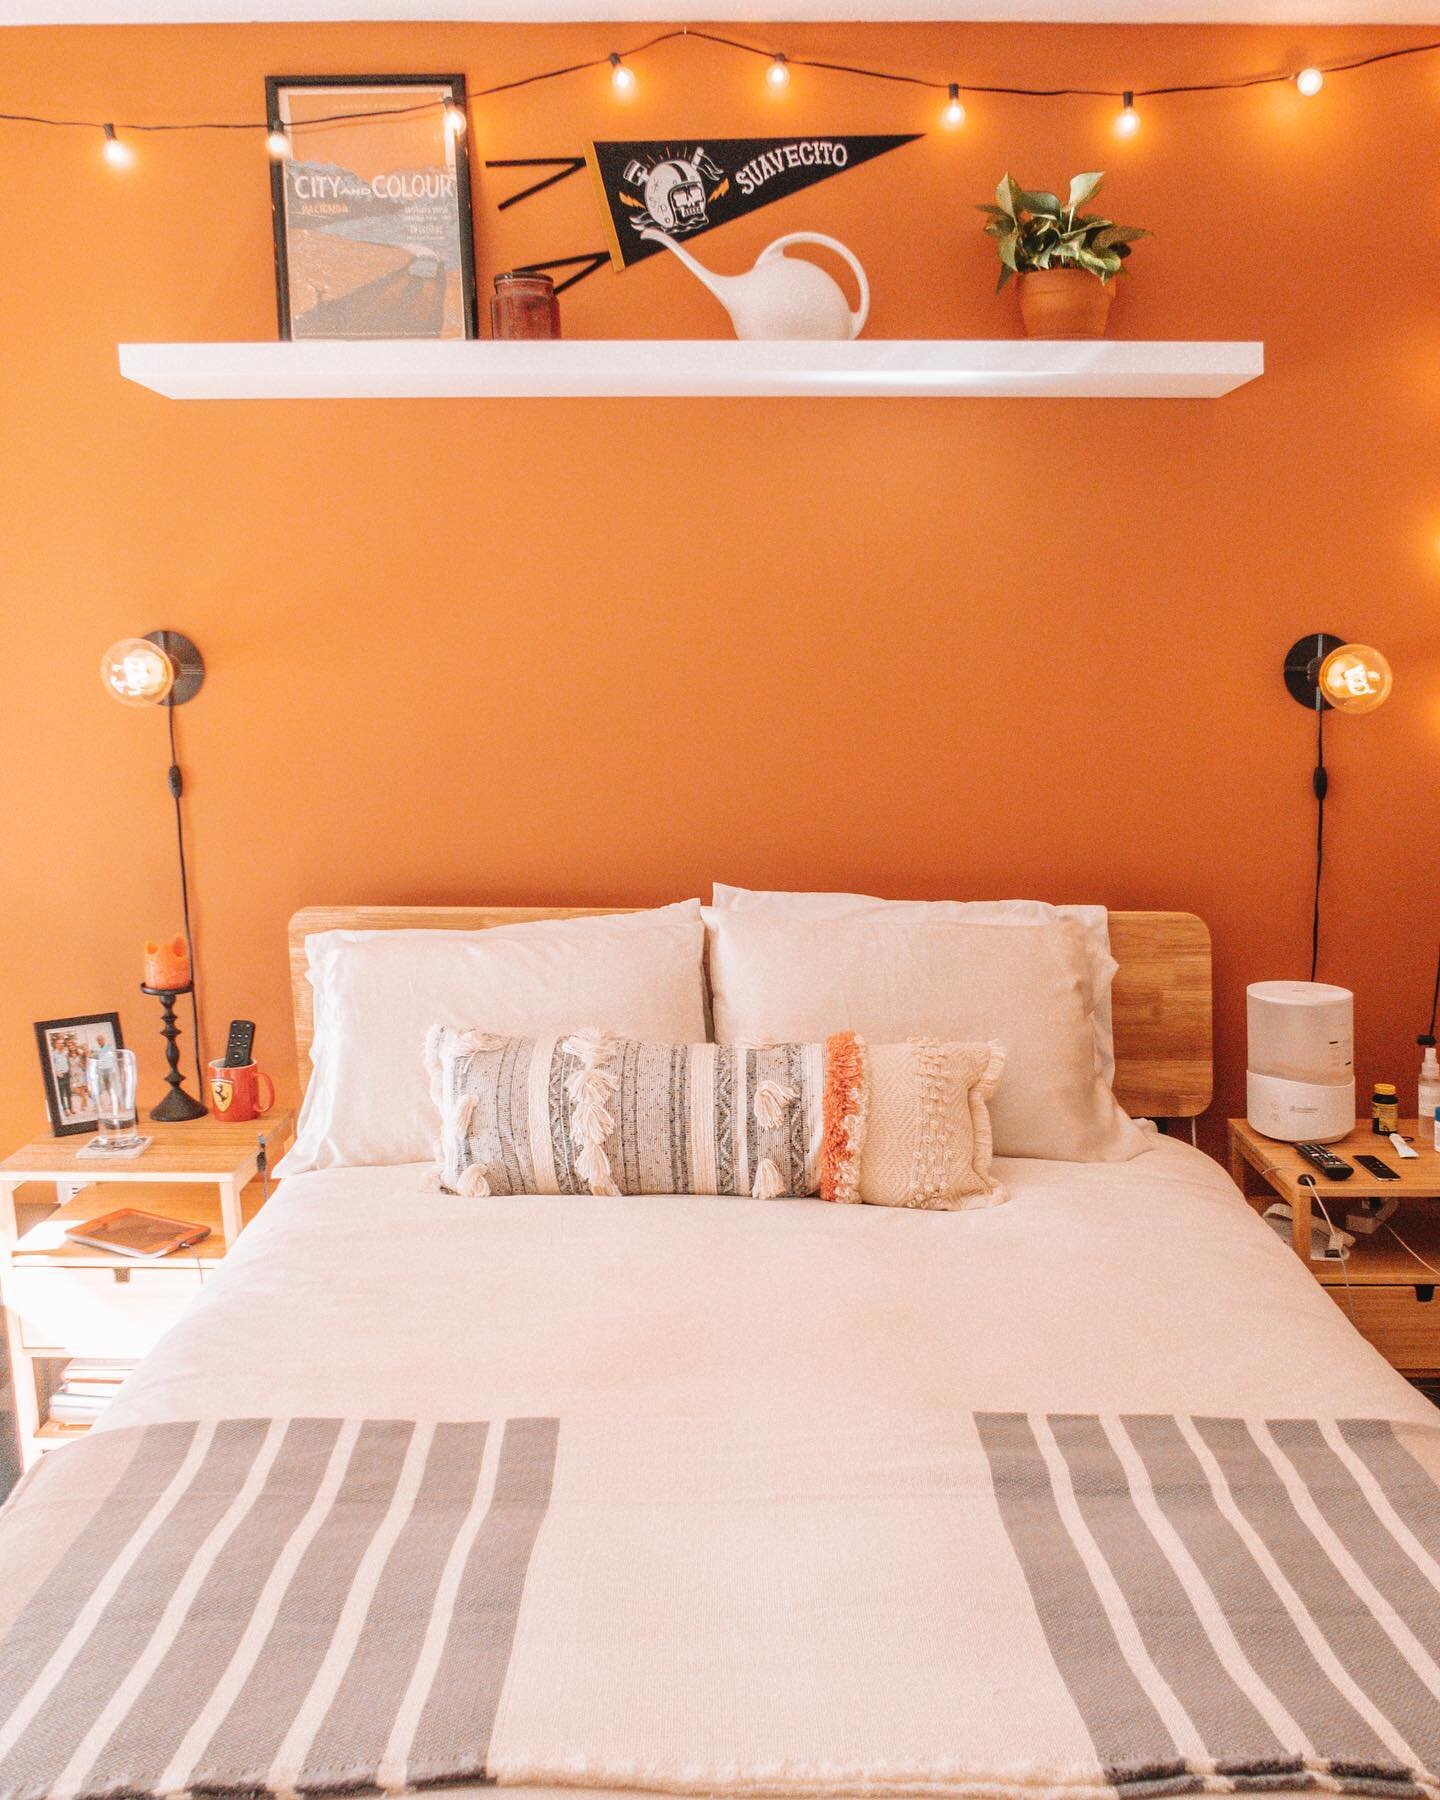 chateau quar*~
.
.
.
.
.
.
.
#cozyhomes #bohobedroom #cozybedroom #targetstyle #targethome #ikeahome #ikeastyle #homestyledecor #orangewall #behrpaint #moroccansky #accentwall #causebox #cutehome #apartmentdecor @apartmenttherapy #apartmenttheraphy